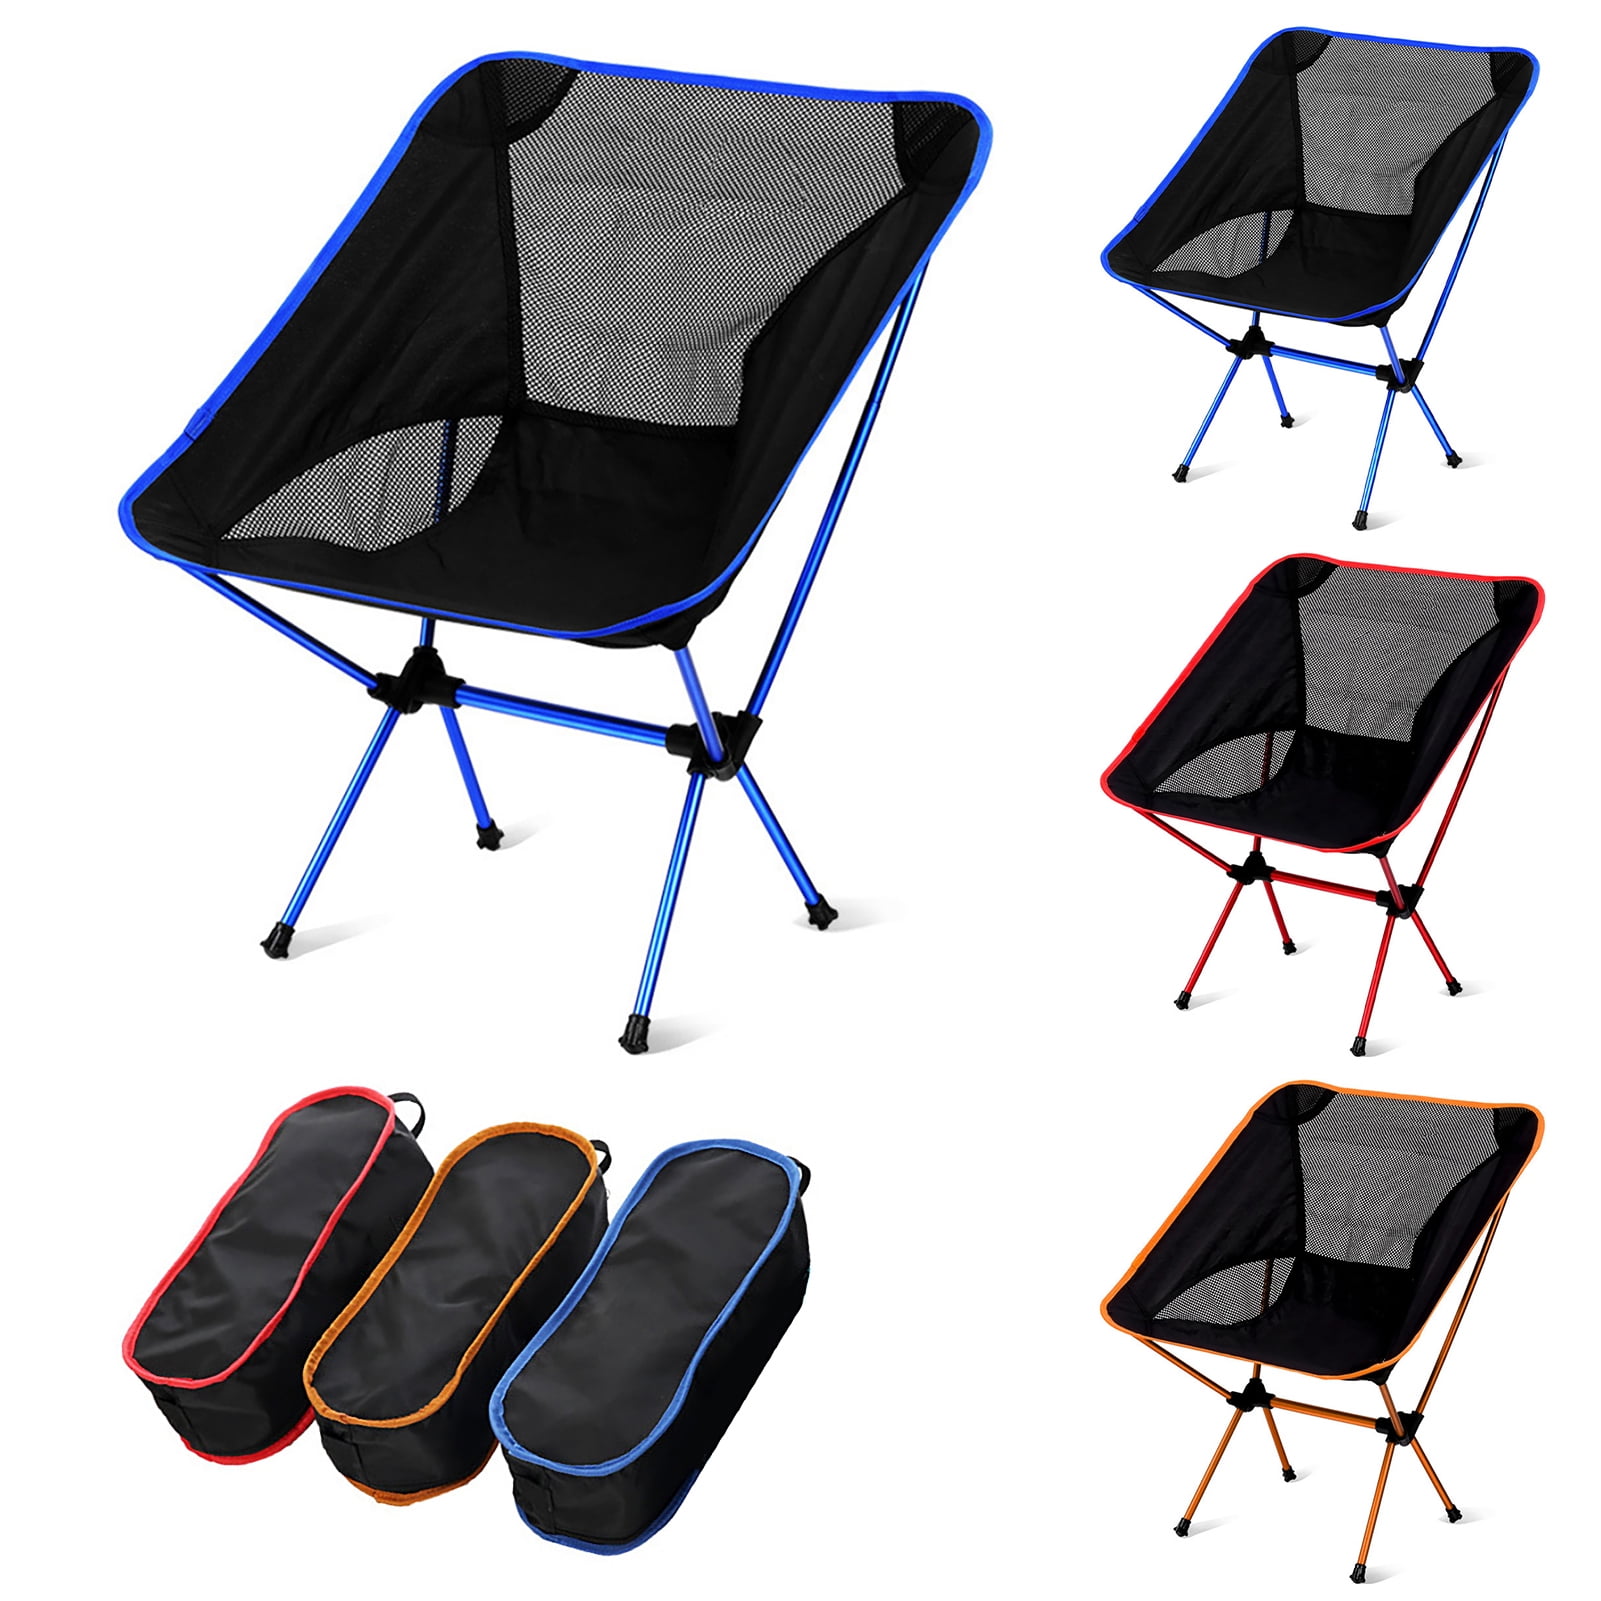 Aluminum Alloy Chair Camping Chair Beach Chair Portable Foldable Double Chair household items Outdoor Bench 